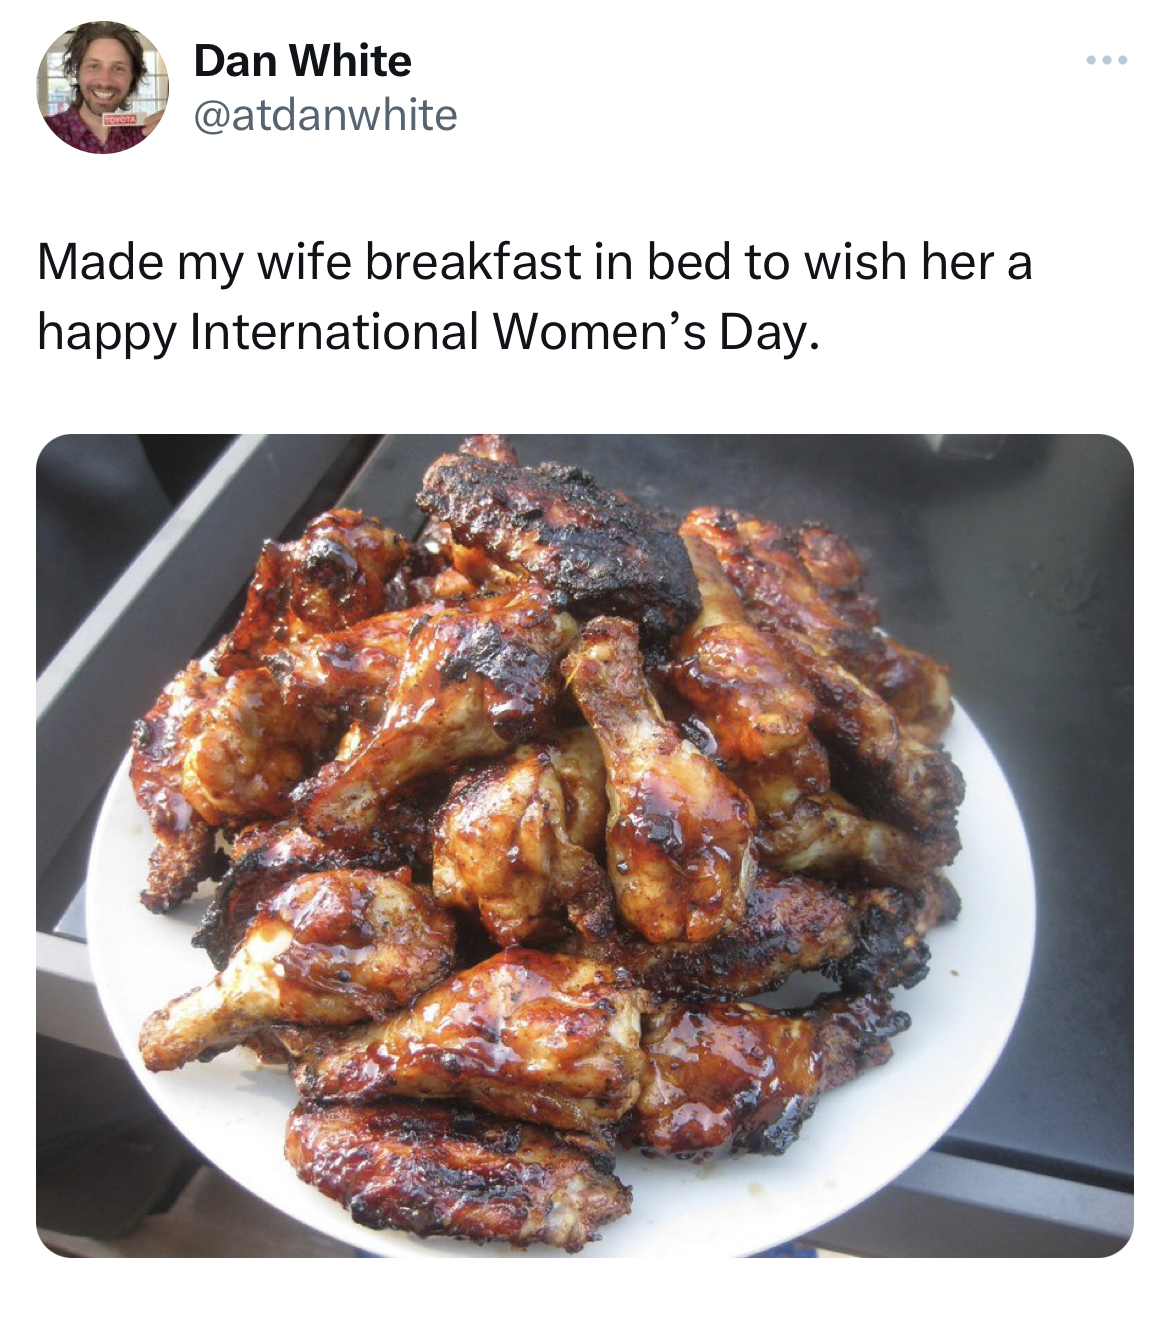 funny tweets - fried food - Dan White Made my wife breakfast in bed to wish her a happy International Women's Day.